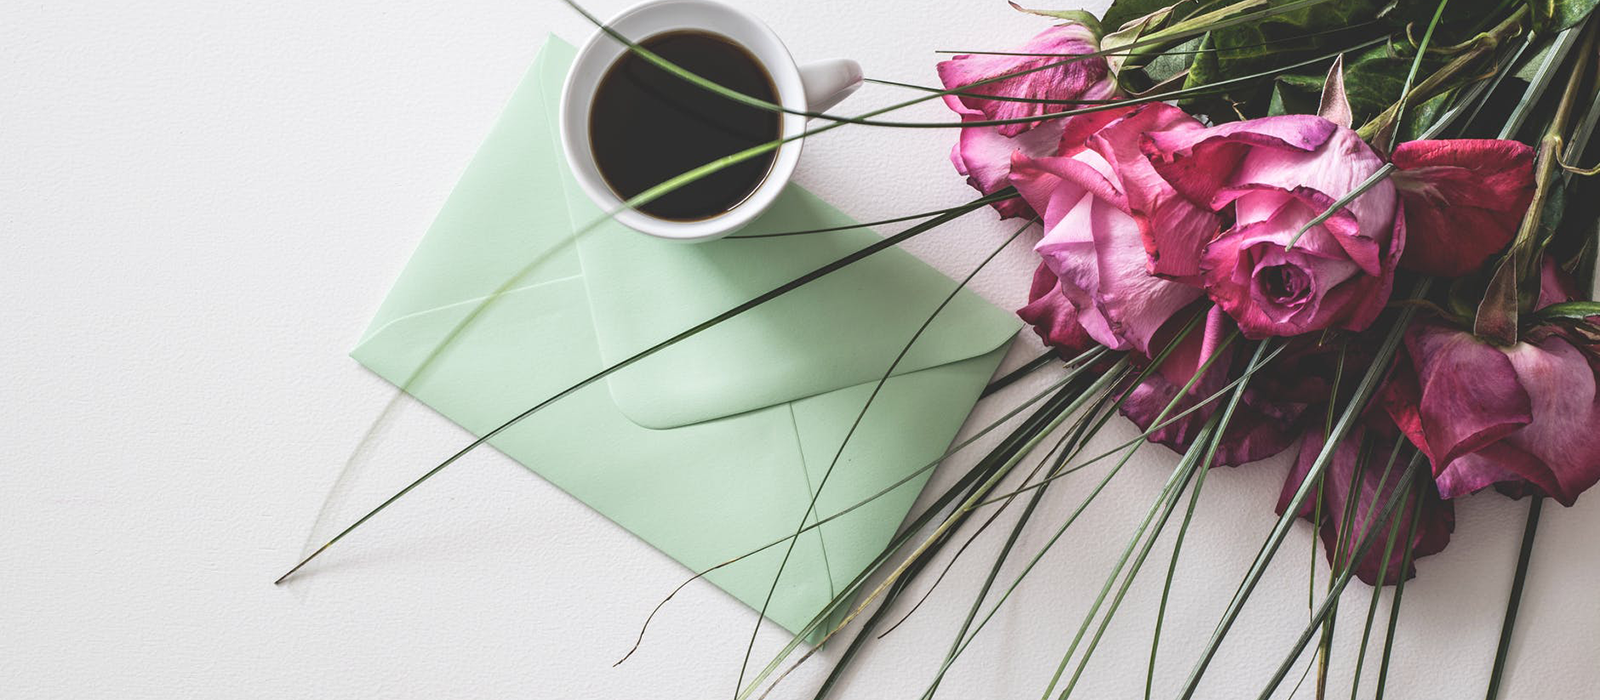 flowers and card on the table with a cup of coffee